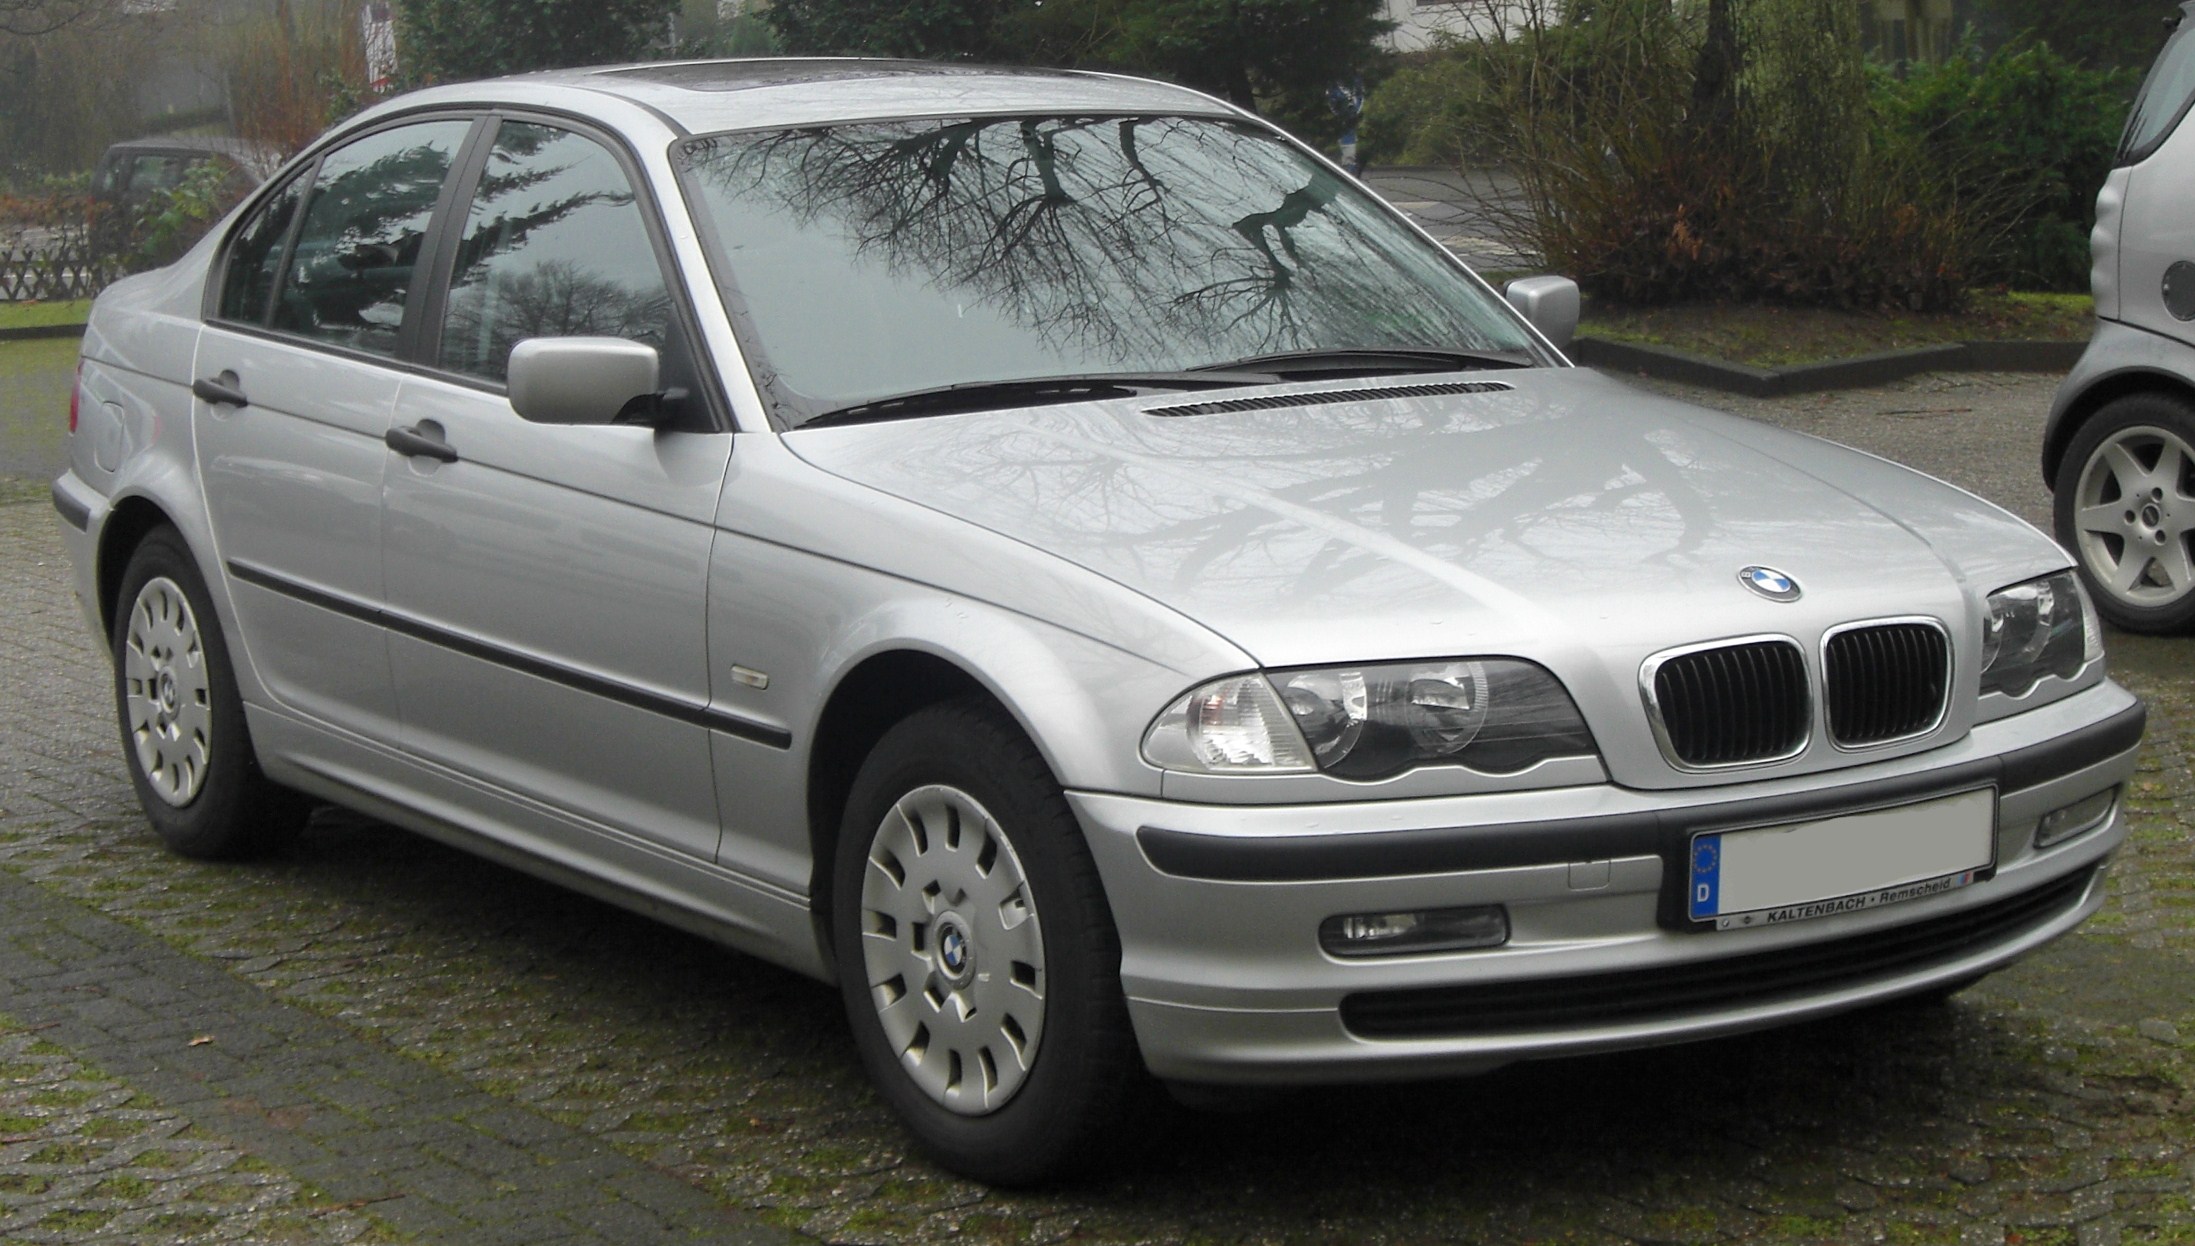 BMW 1998 3 Series is everything that you may look for in a hatchback #8